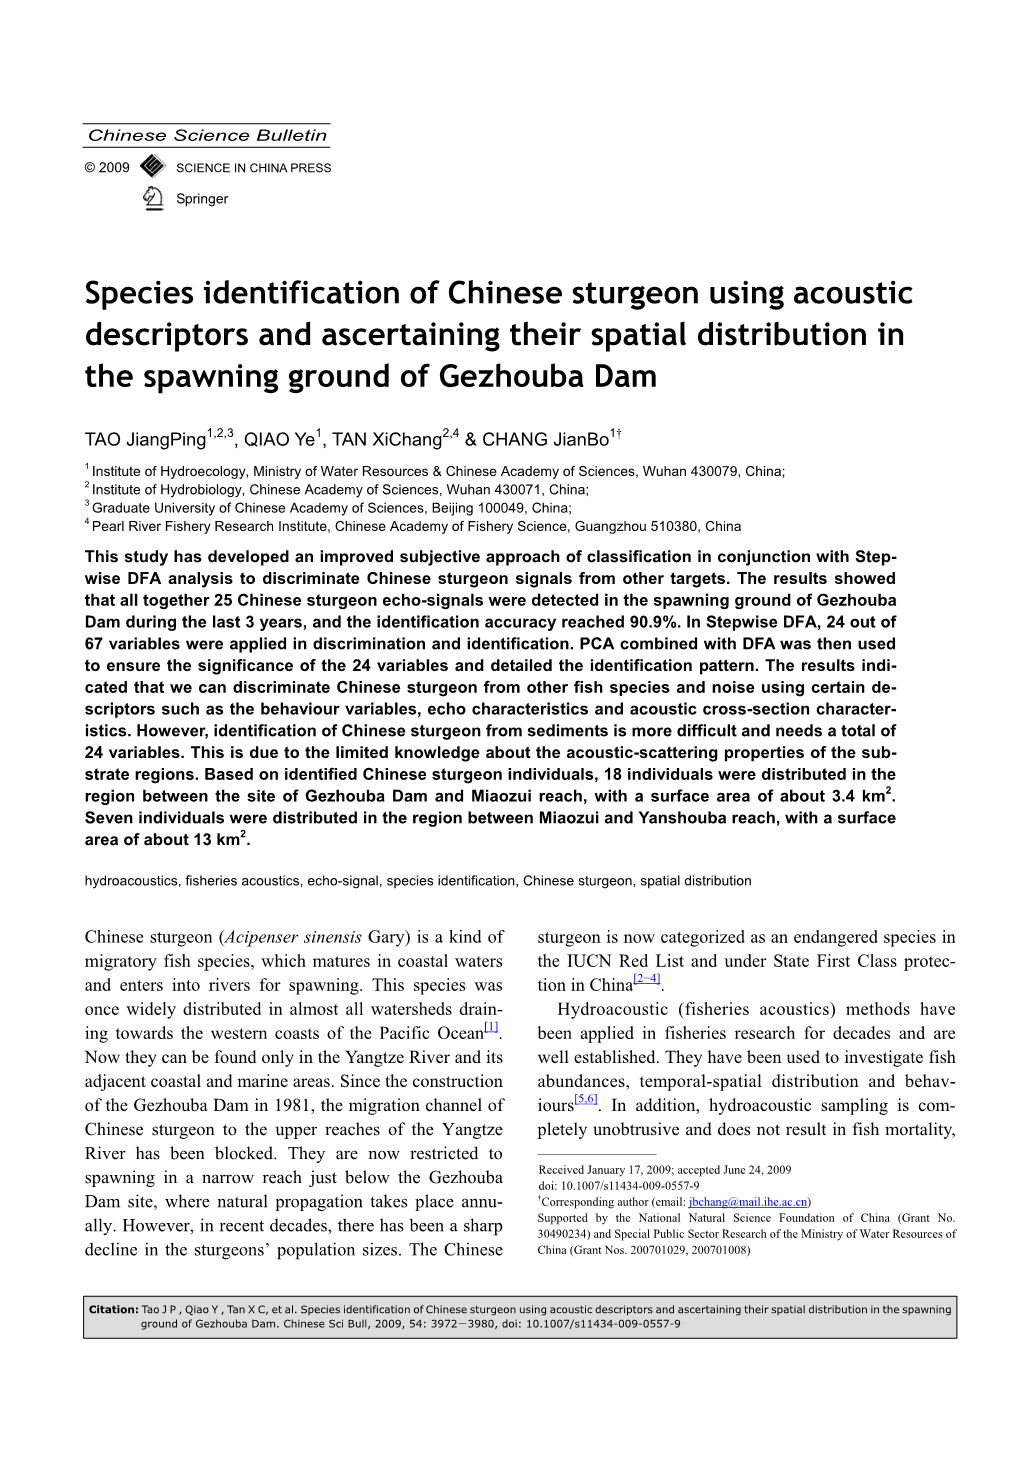 Species Identification of Chinese Sturgeon Using Acoustic Descriptors and Ascertaining Their Spatial Distribution in the Spawning Ground of Gezhouba Dam